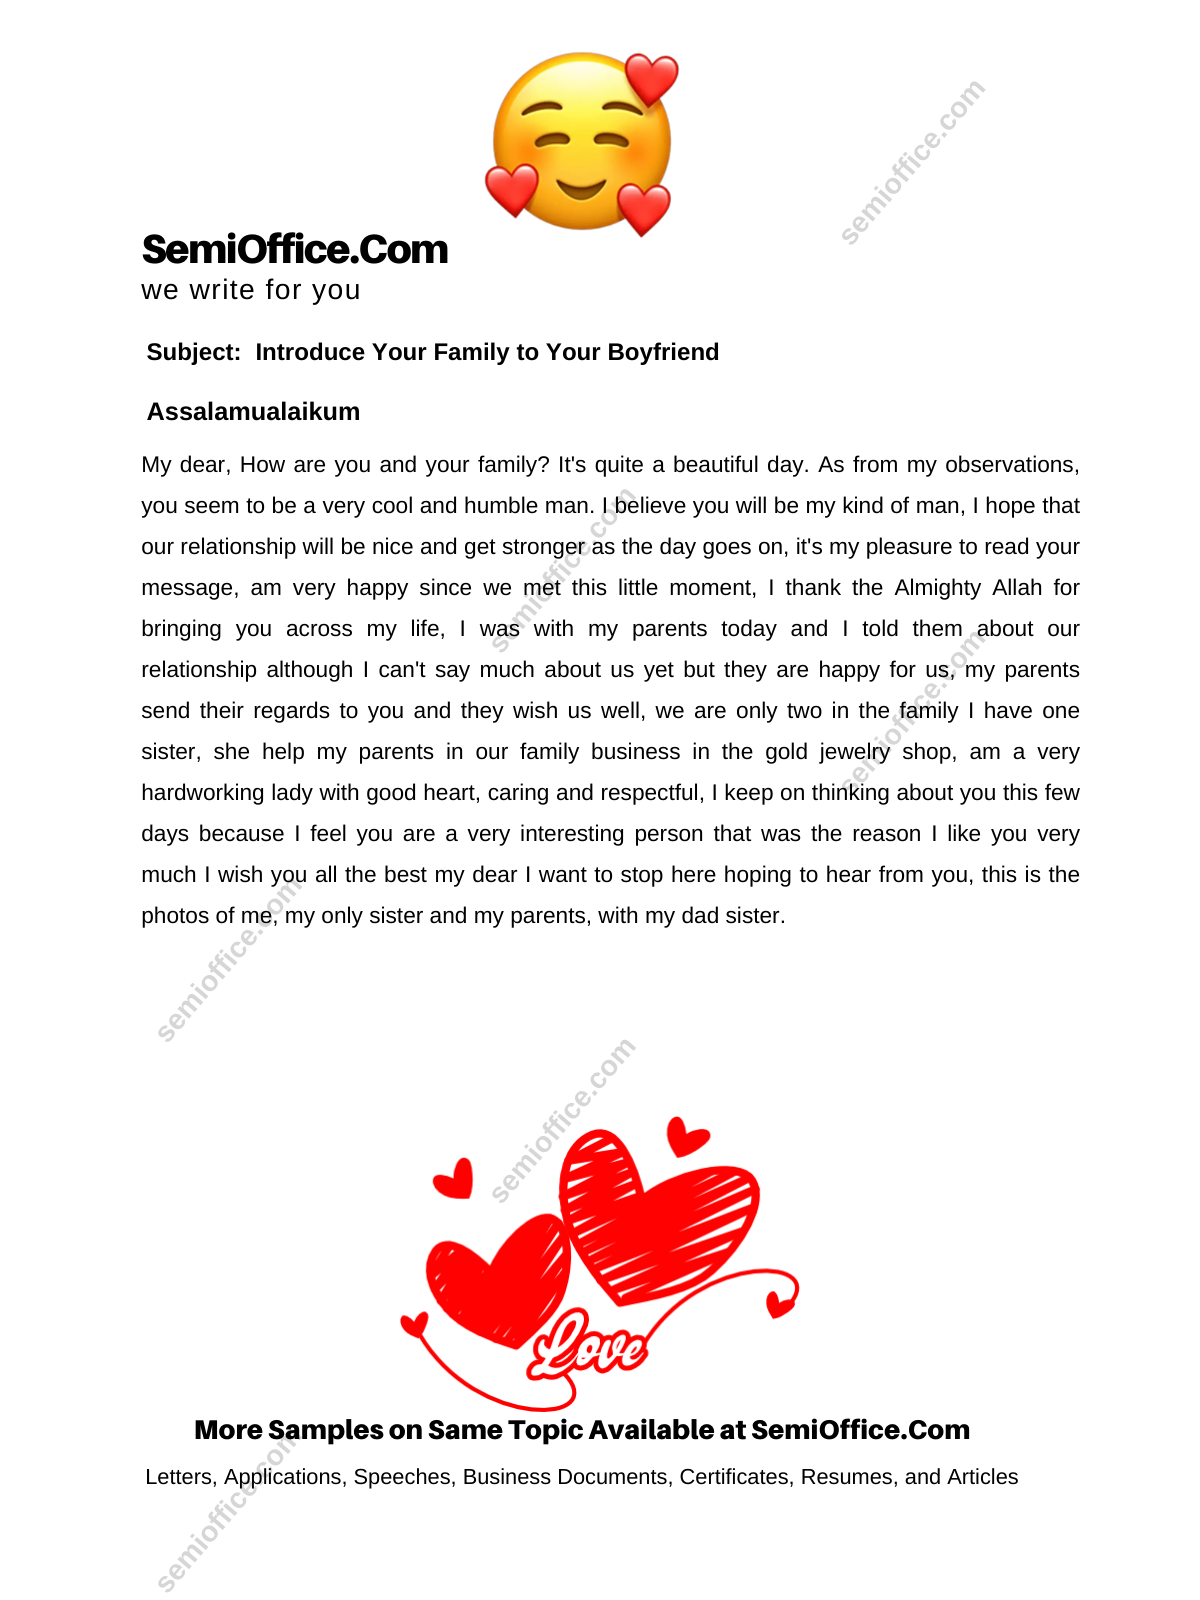 letter-to-boyfriend-to-introduce-your-family-semioffice-com